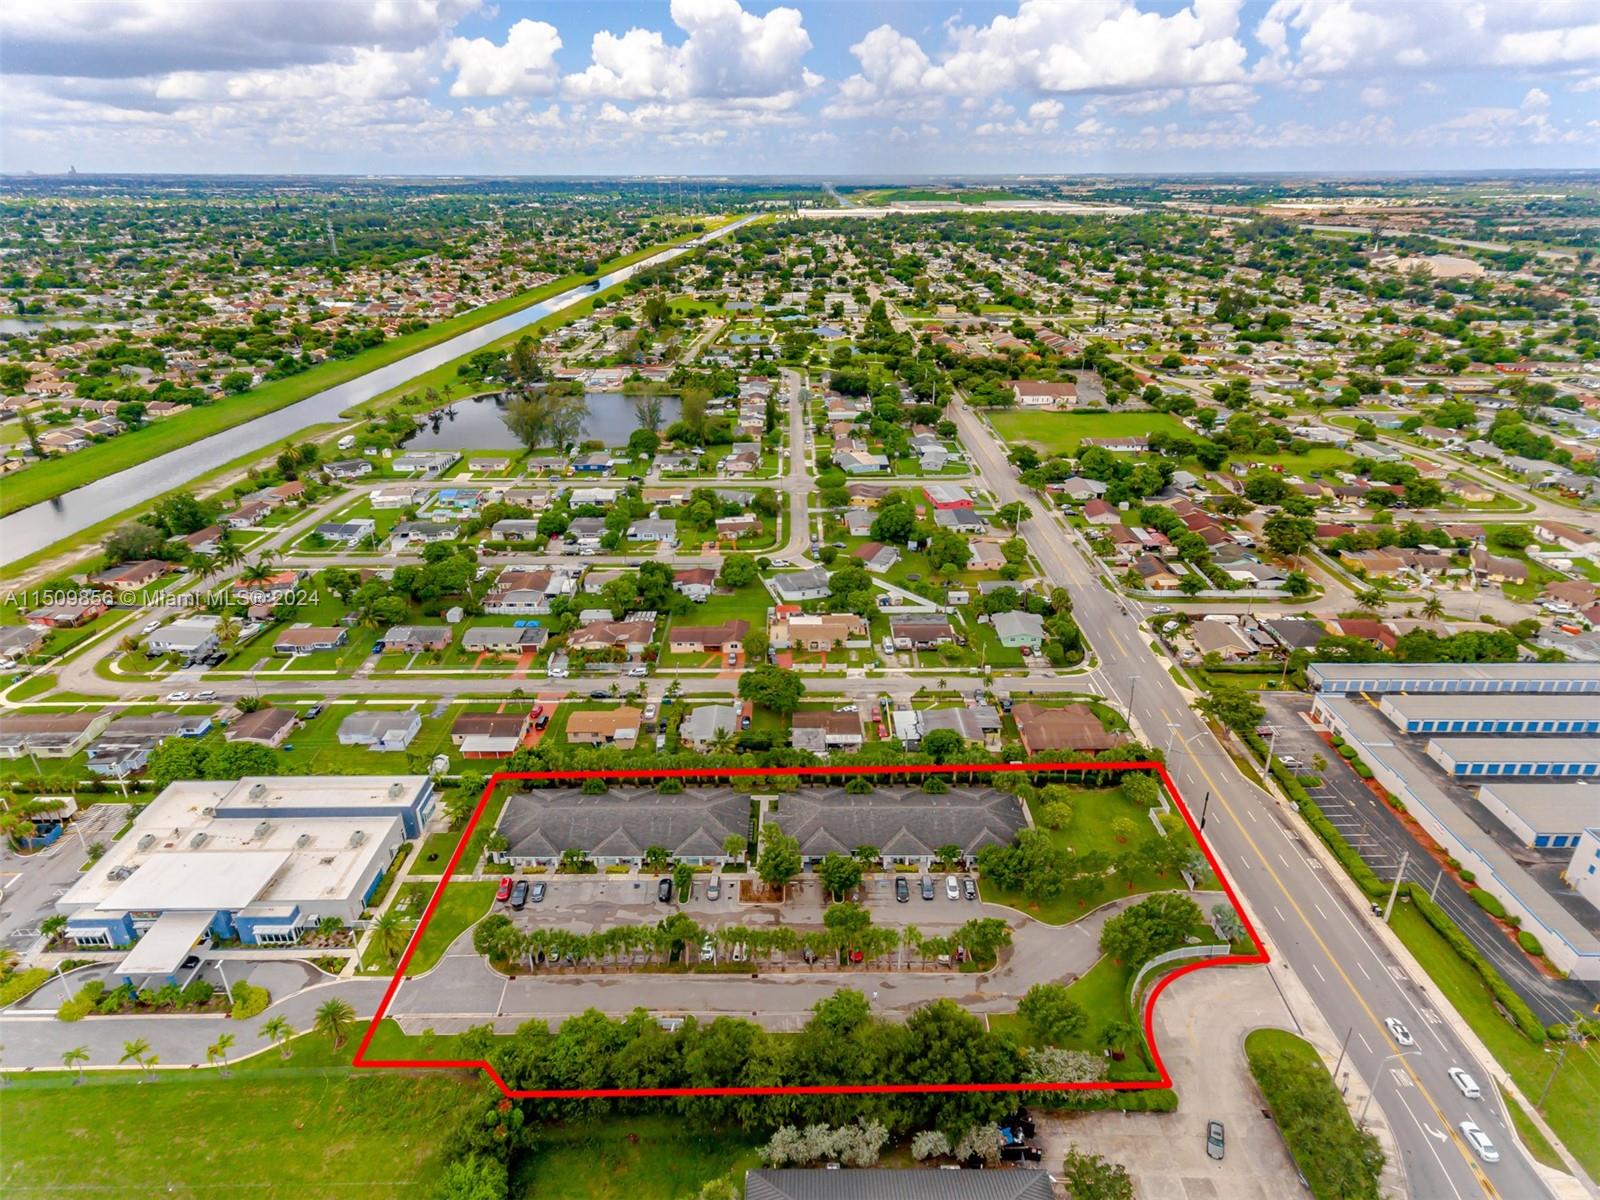 20690 NW 27th Avenue, Miami Gardens, Florida 33056, ,Commercialsale,For Sale,20690 NW 27th Avenue,A11509856